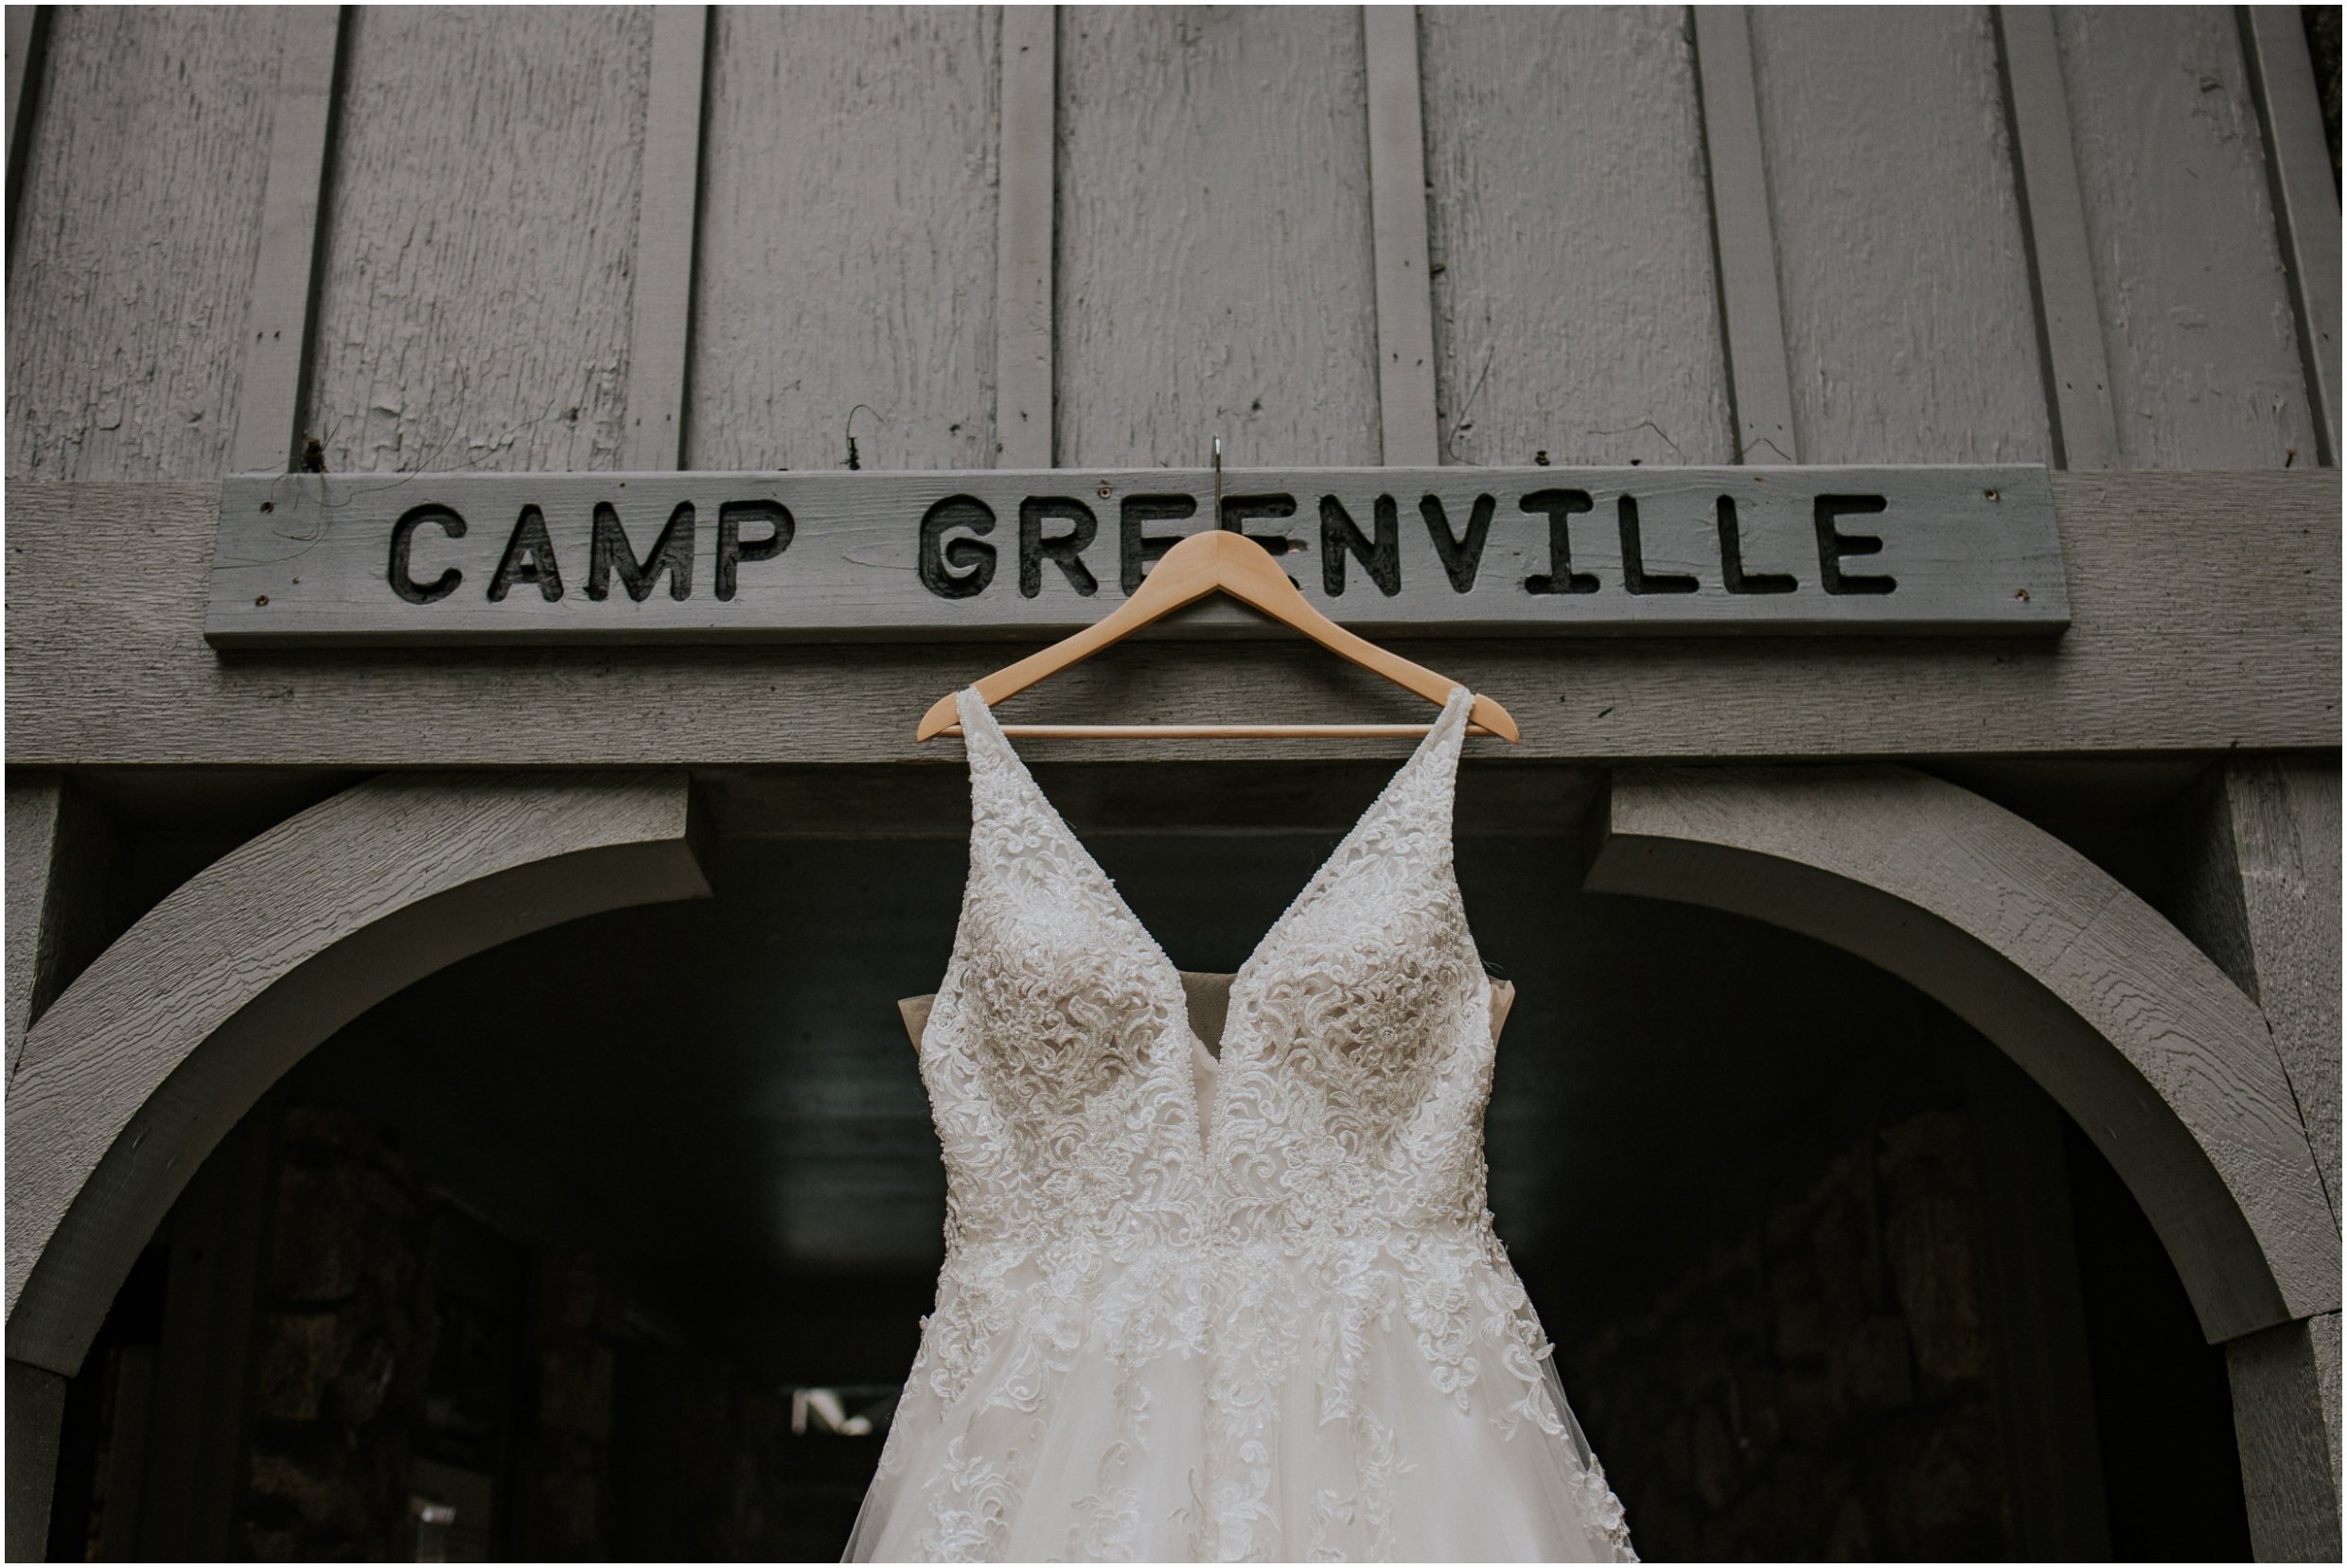 the-pretty-place-fred-symmes-chapel-greenville-sc-brevard-nc-camp-mountain-wedding-south-carolina-tennessee-katy-sergent-photography_0003.jpg